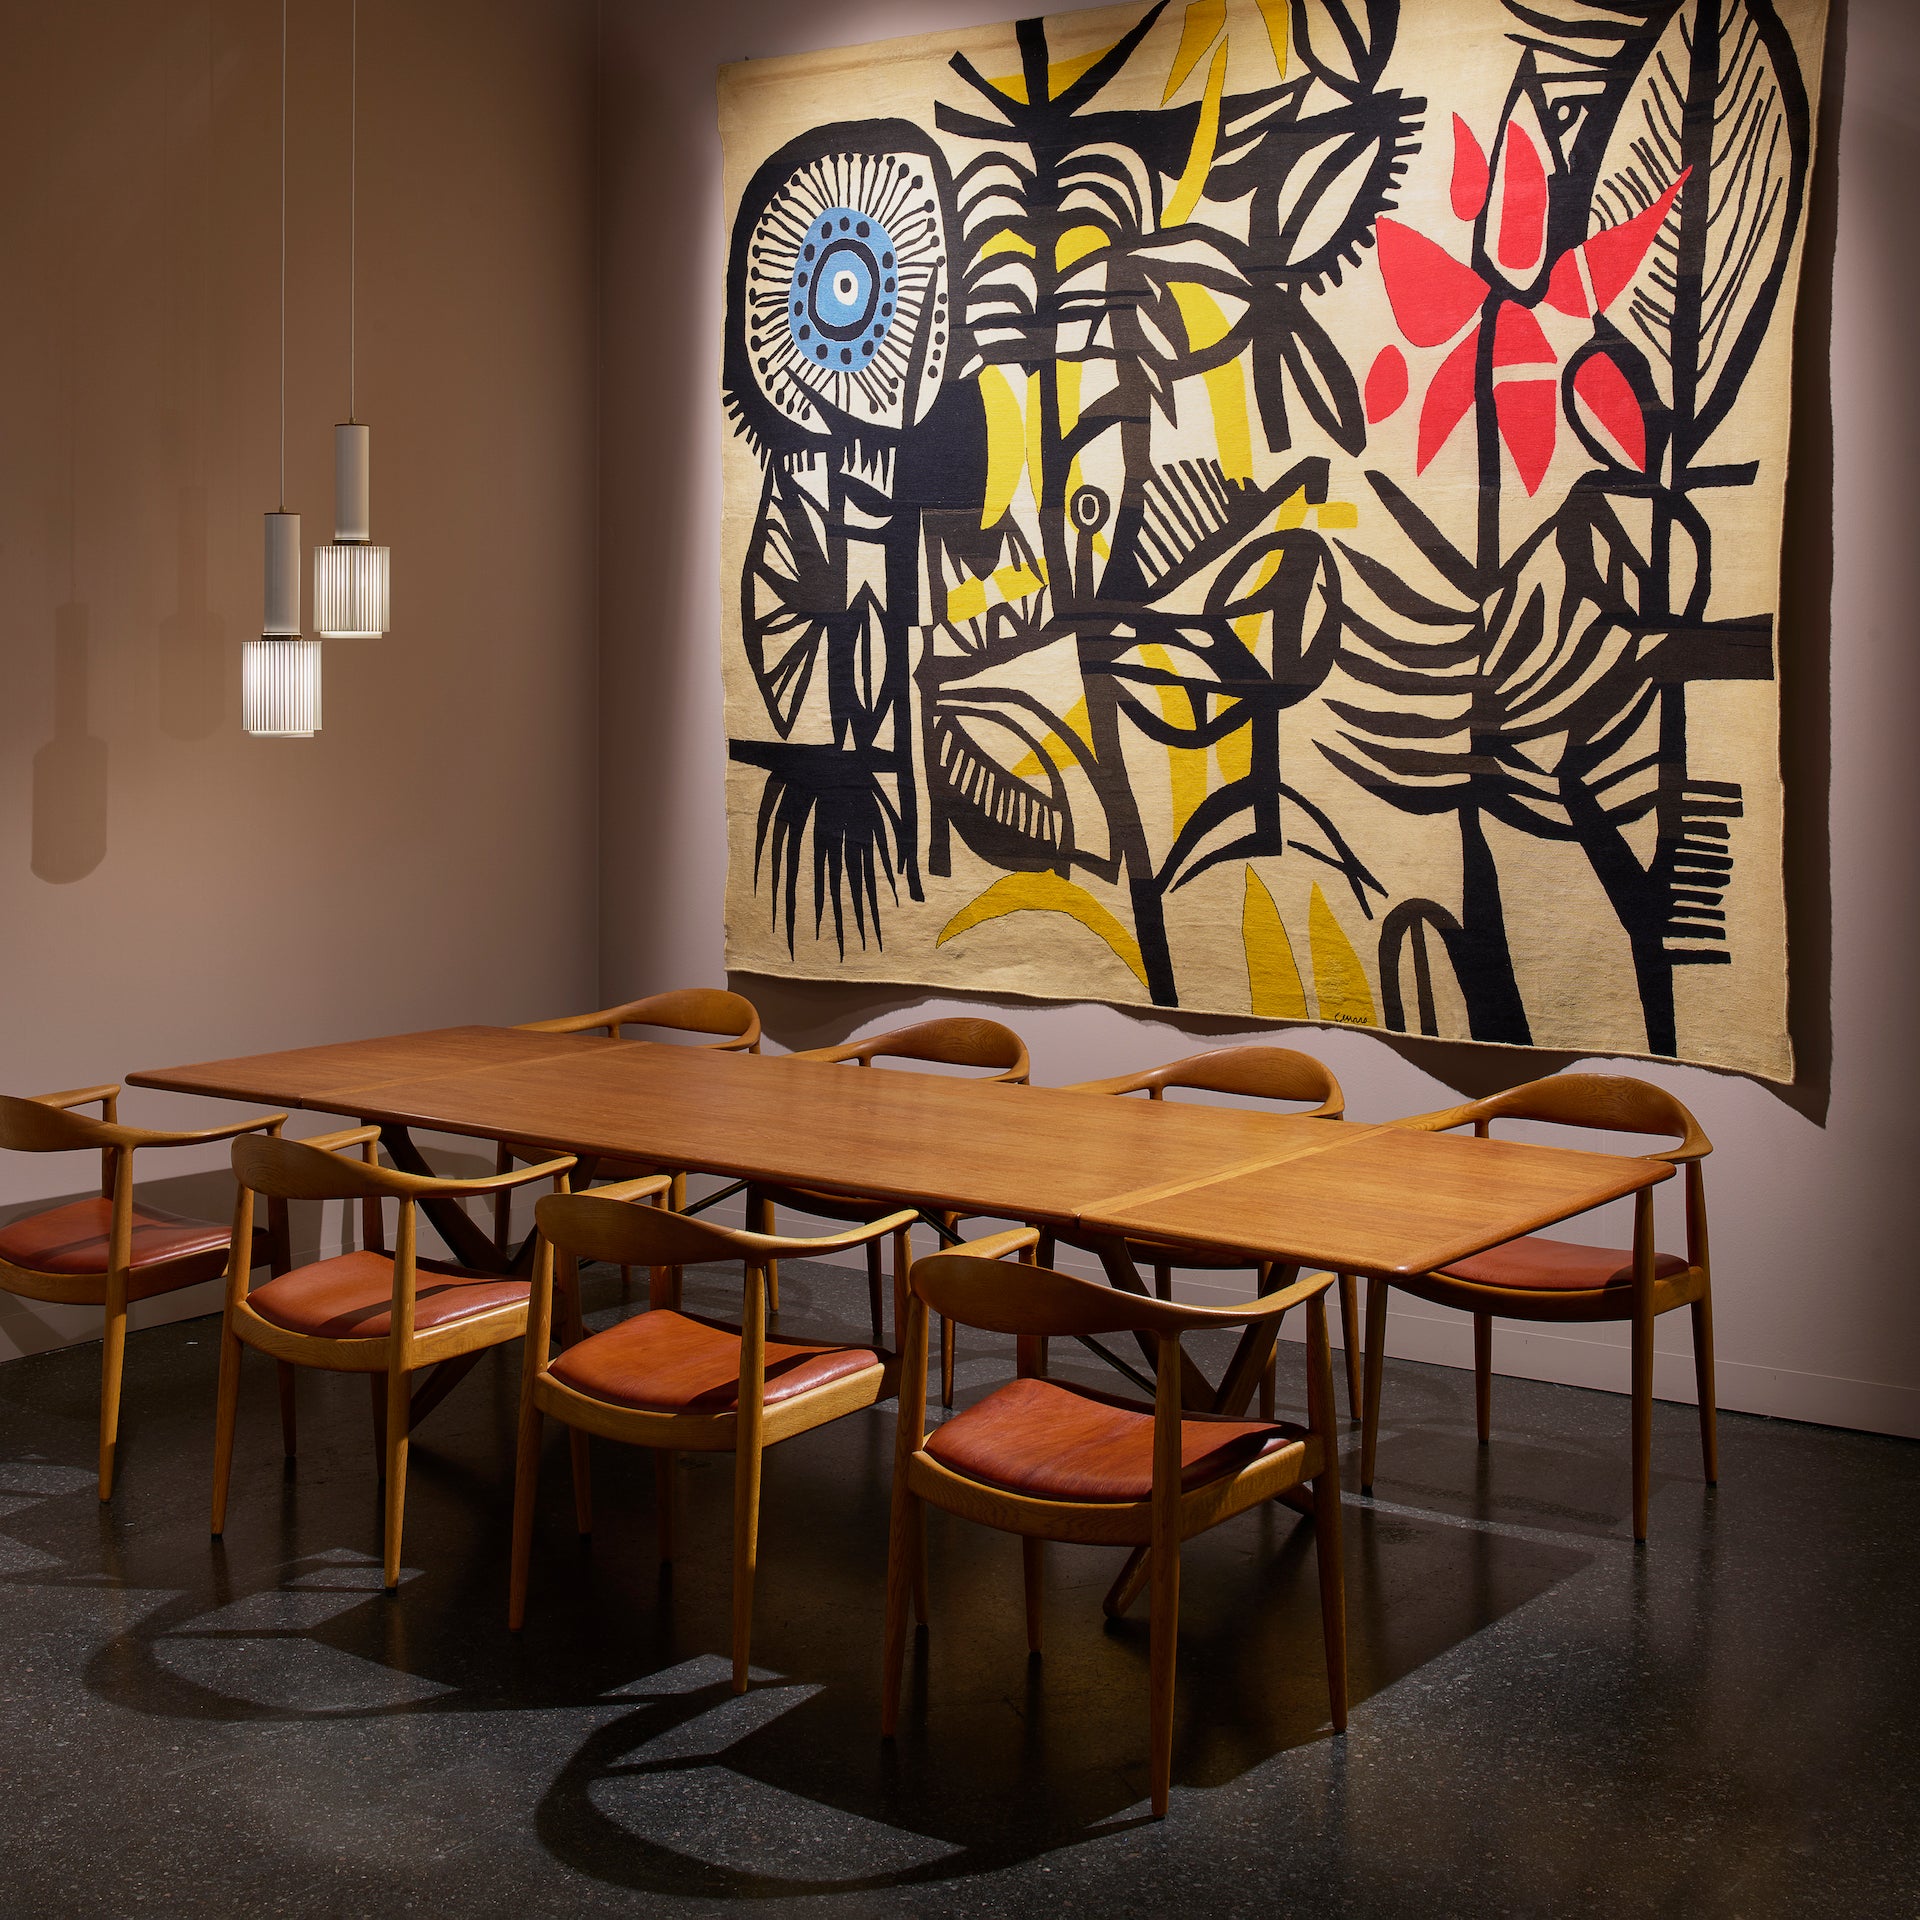 Oak & Brass Table (1960) and Round Chairs (1949) by Hans Wegner and Untitled Tapestry by Genaro De Carvalho (c. 1965), presented by Gokelaere & Robinson at Design Miami/ Basel 2023. Photo © James Harris for Design Miami/ Basel